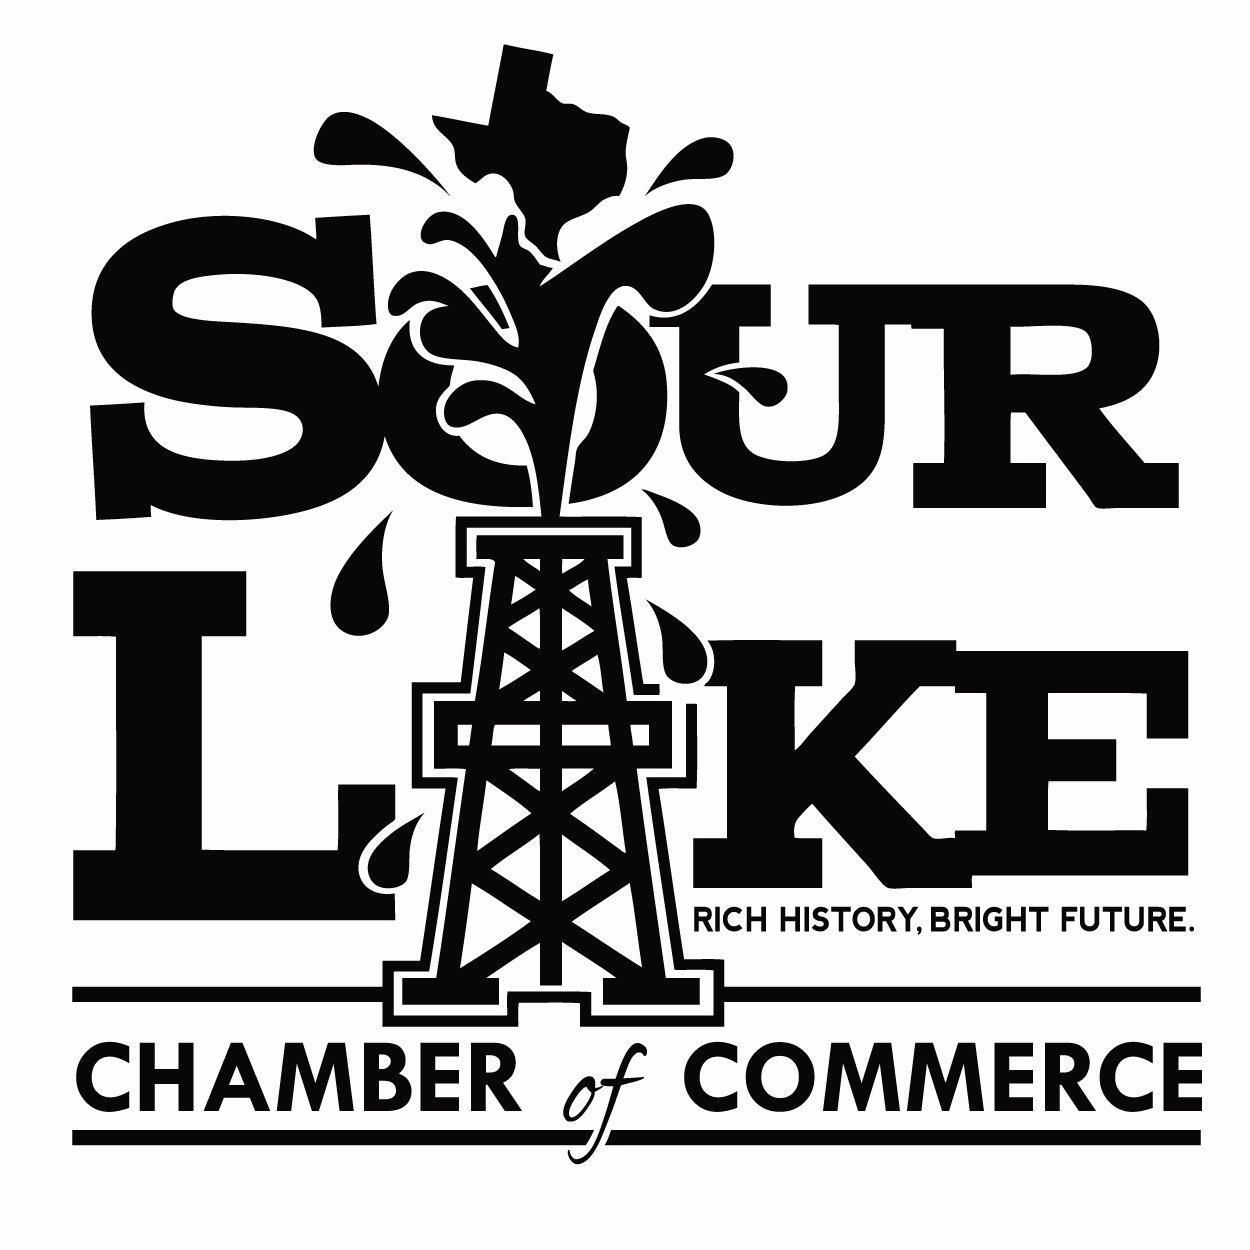 Our chamber is a membership driven organization committed to enhancing economic growth and quality of life in Sour Lake and the Hardin-Jefferson communities.